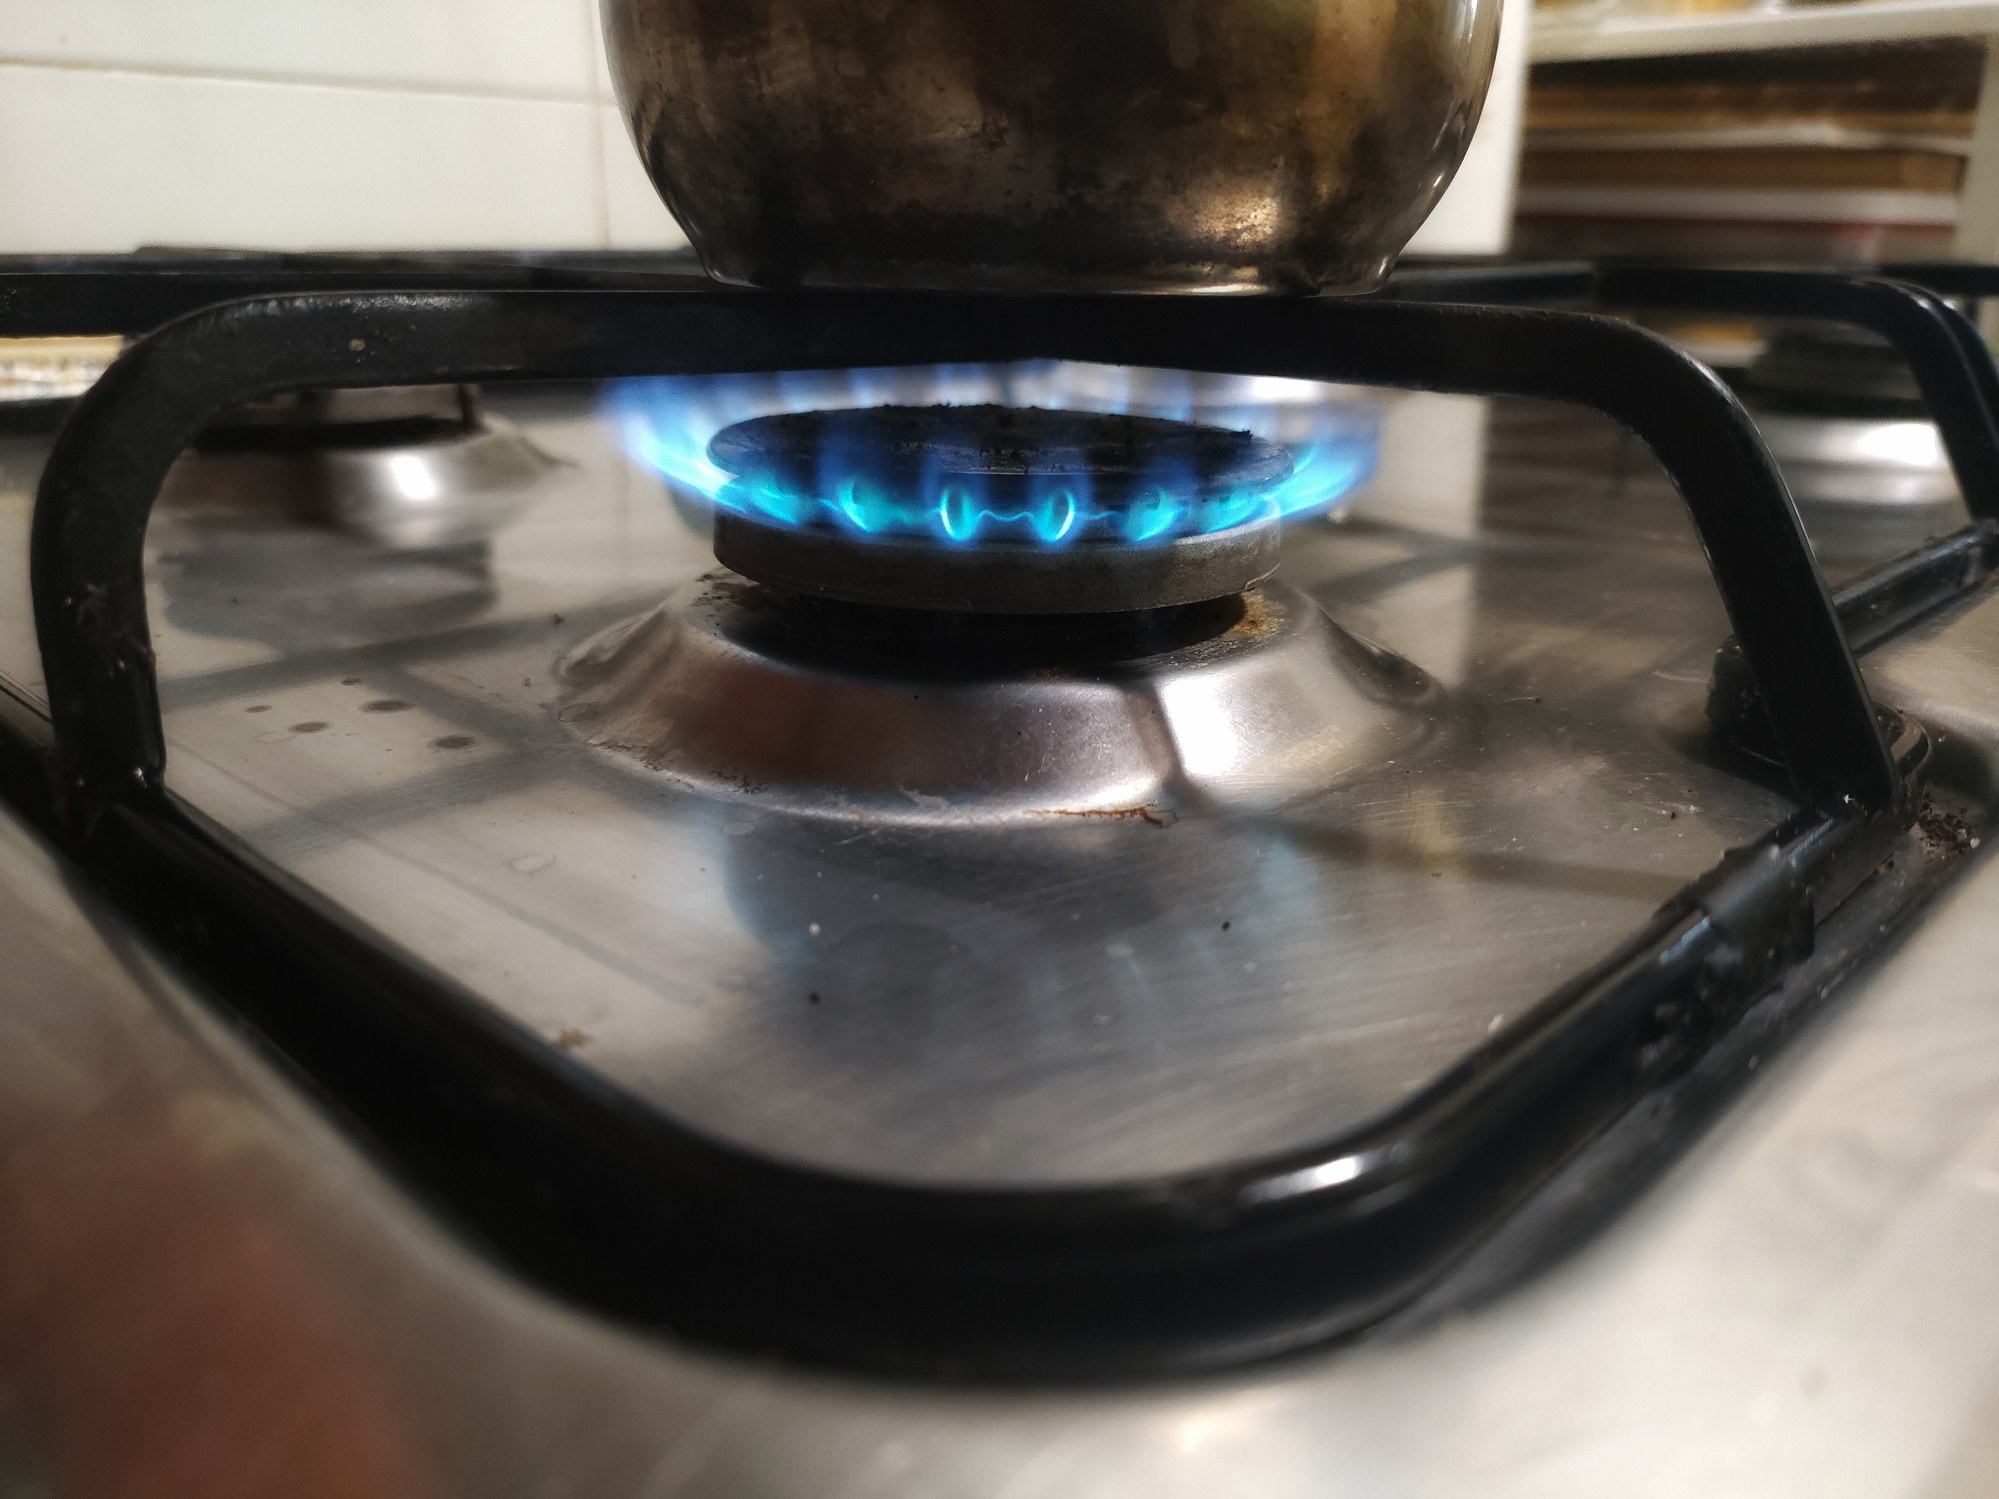 A gas burner in the kitchen